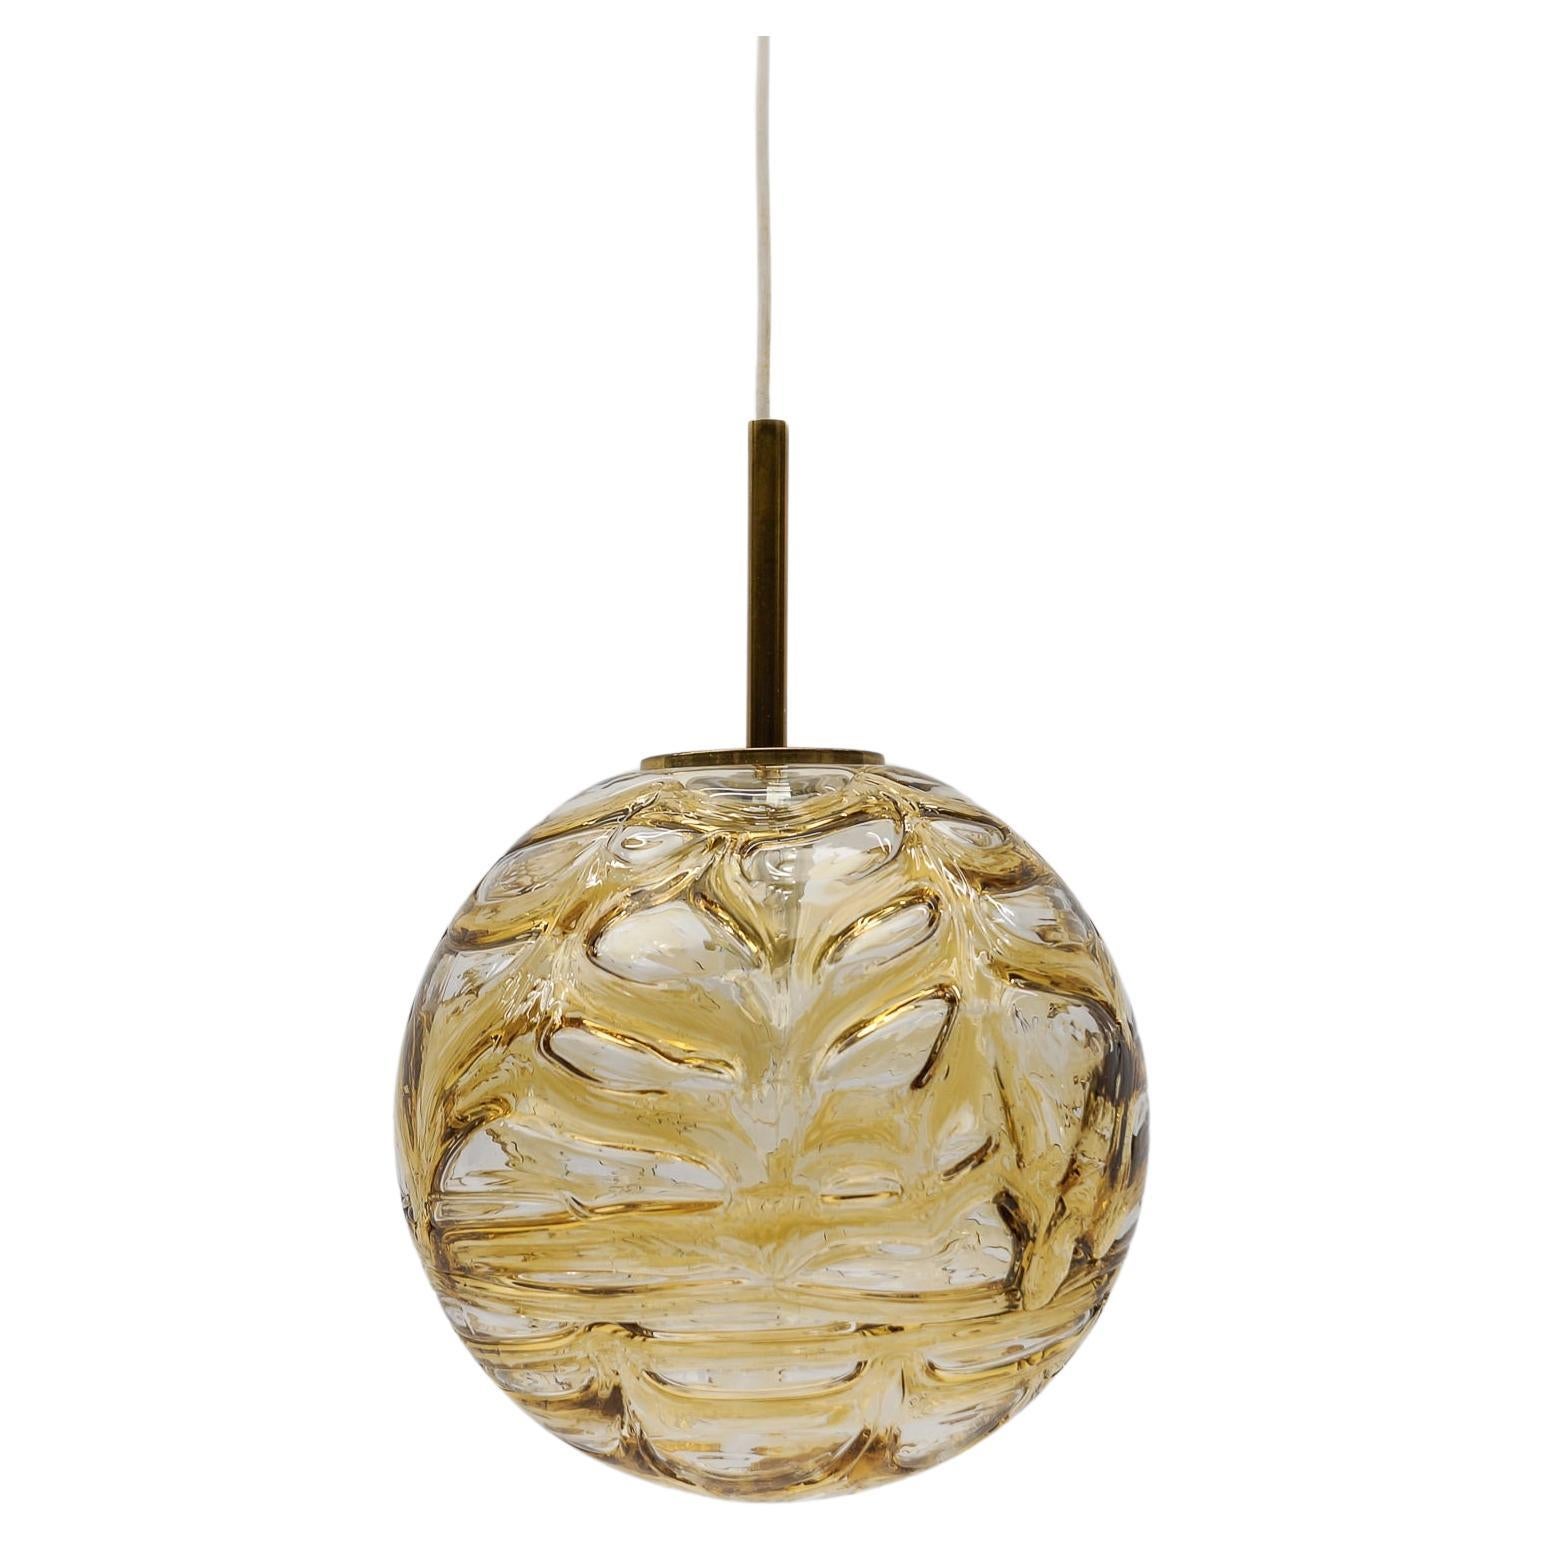 Yellow Murano Glass Ball Pendant Lamp by Doria, - 1960s Germany For Sale